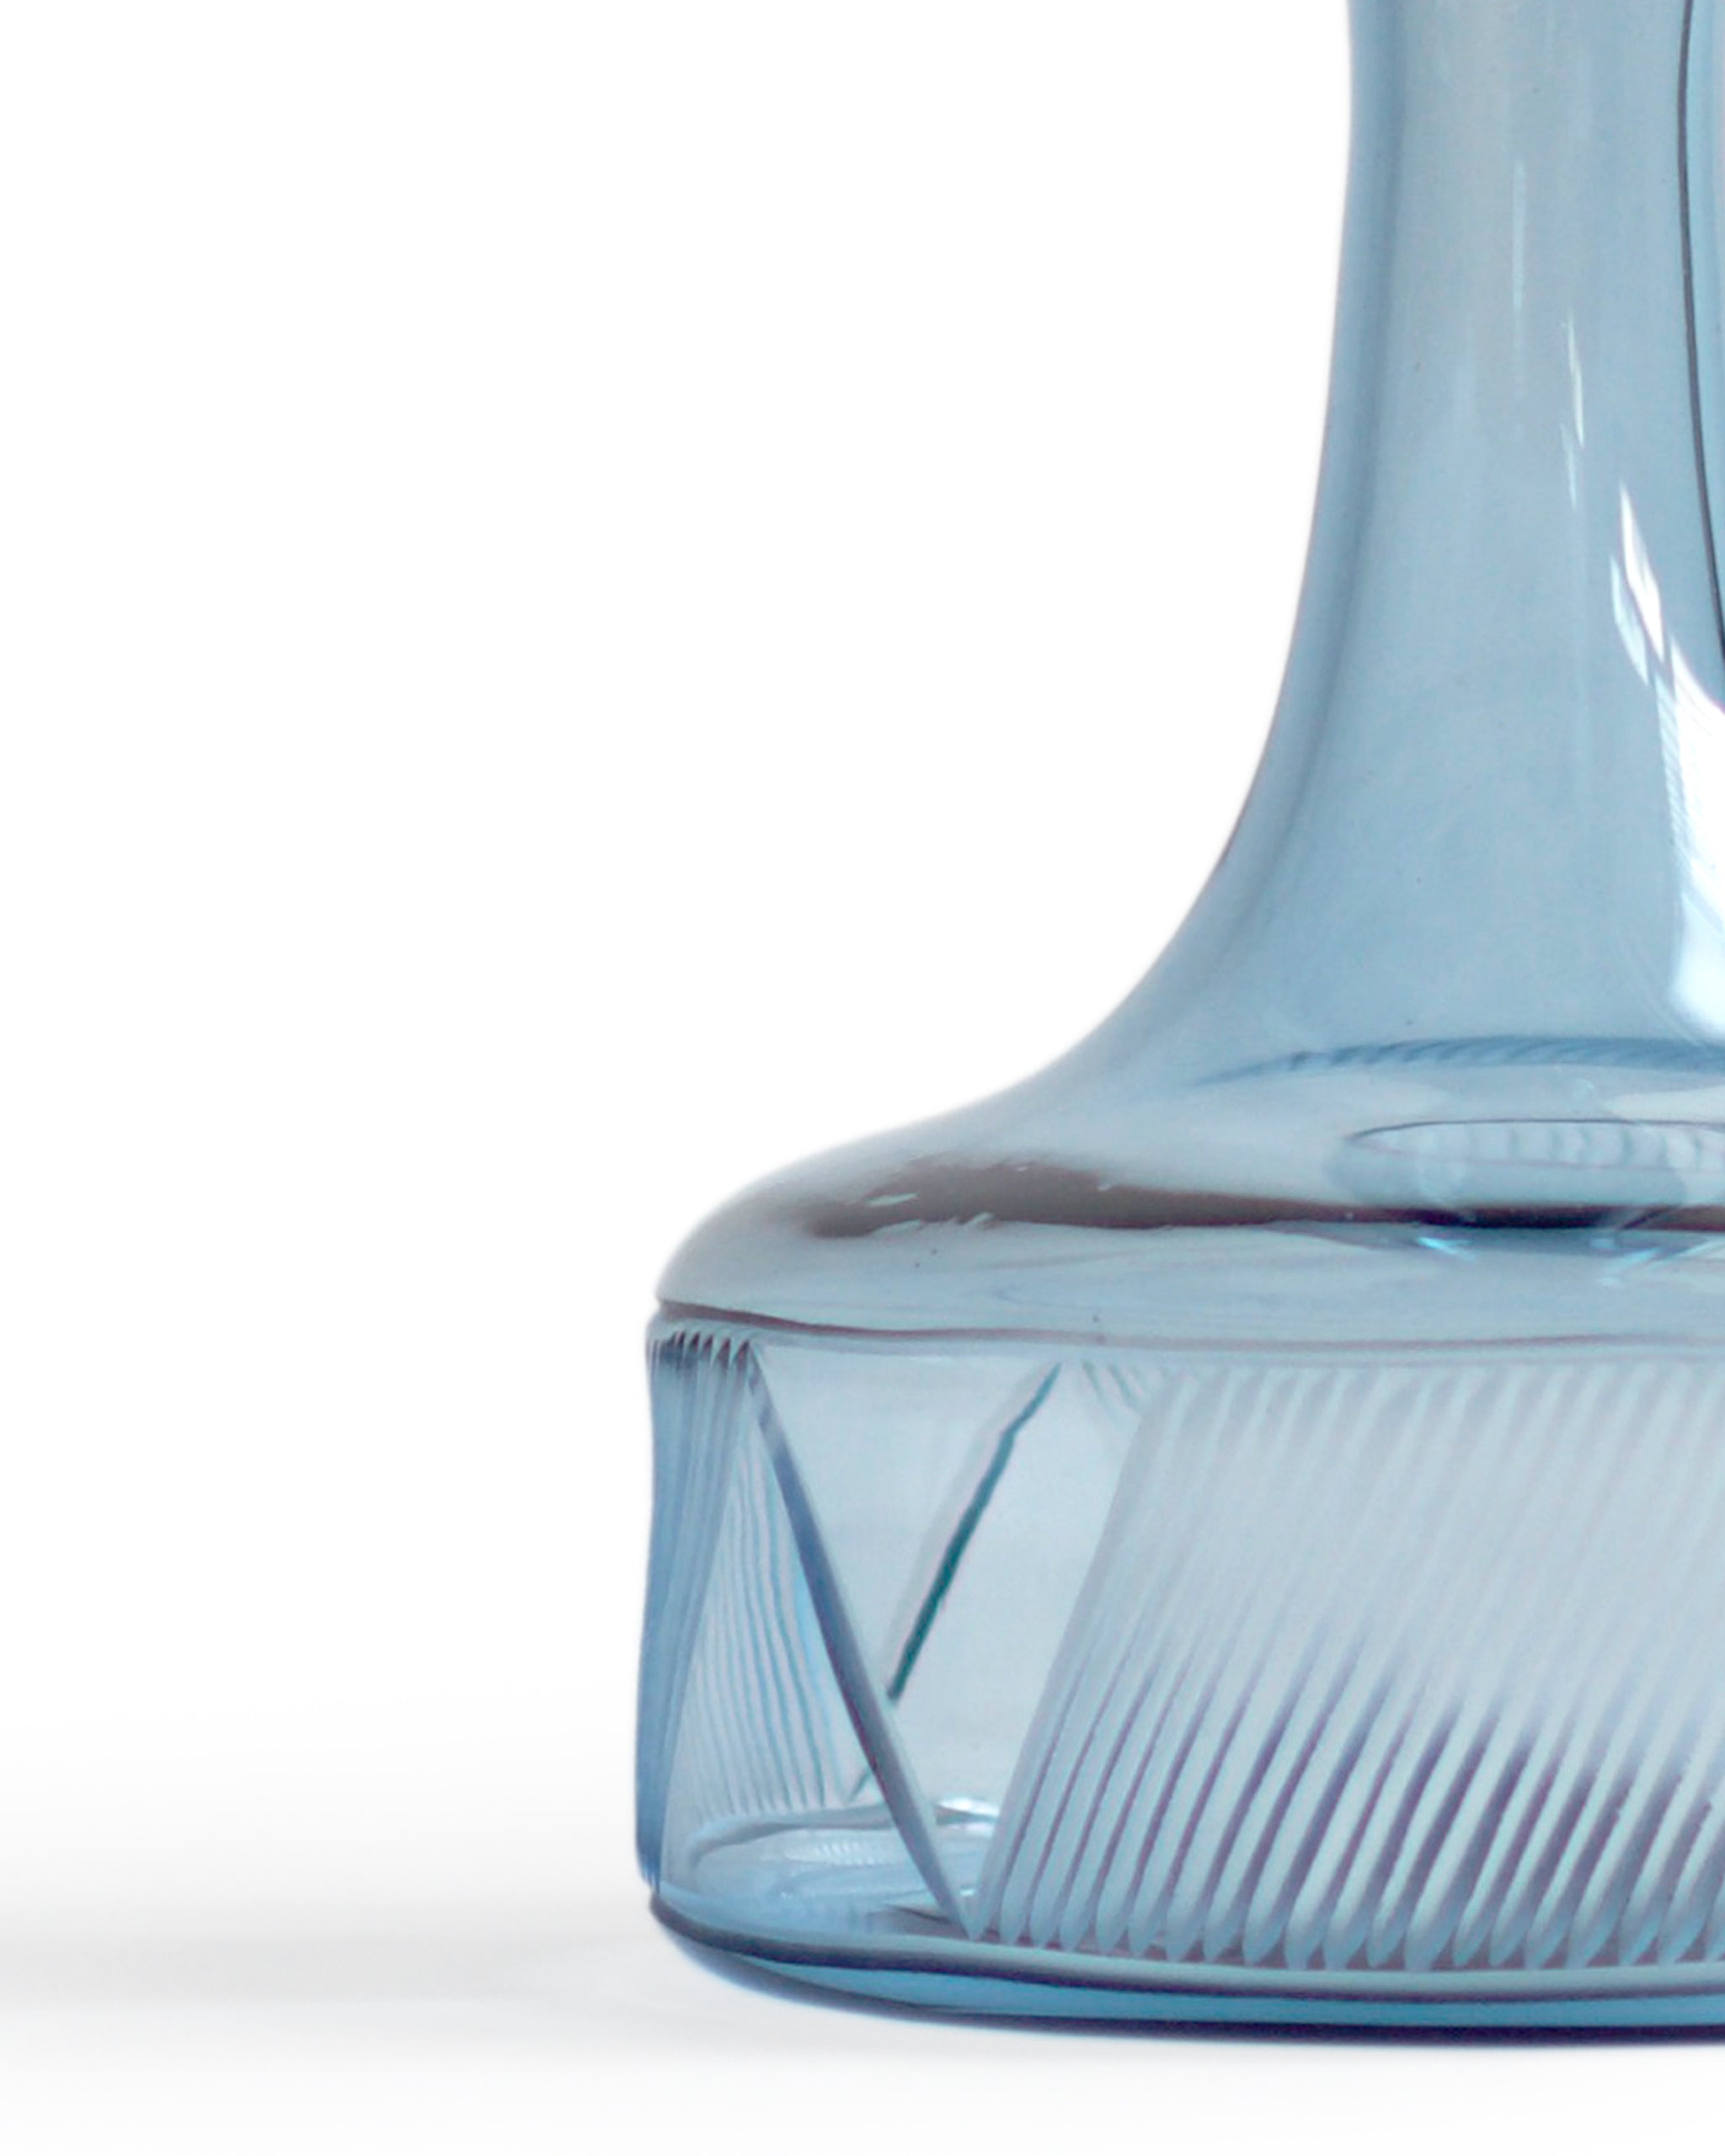 Cropped detail of the body of the reclaimed blue whiskey decanter. Slash pattern from N and Z are visible.